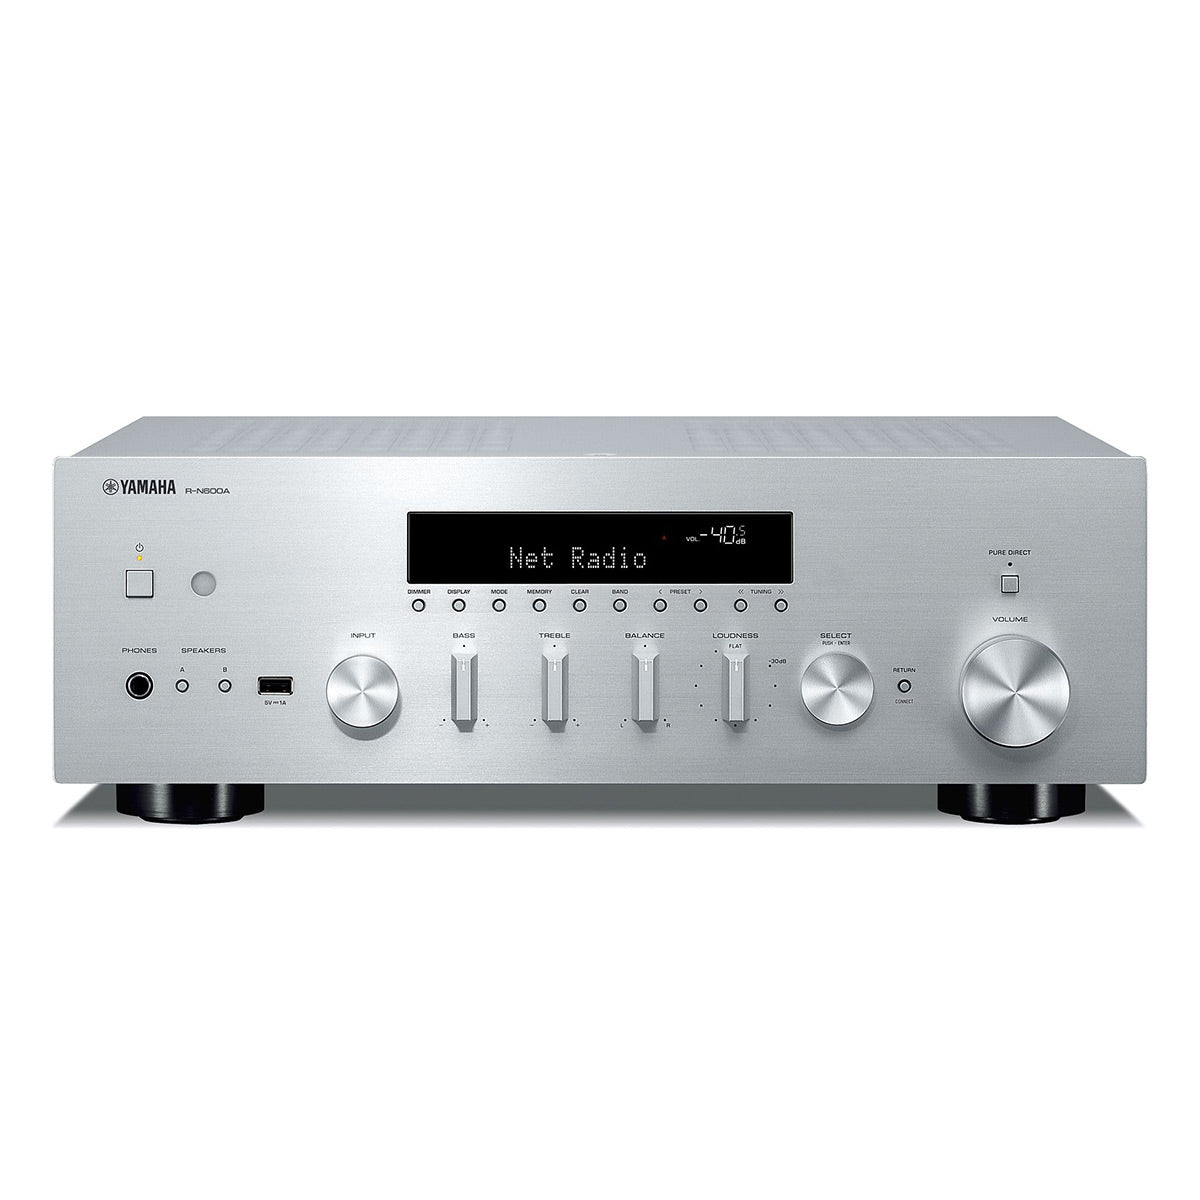 Yamaha R-N600A Stereo Network Receiver with Wi-Fi, Bluetooth, and MusicCast (Silver)